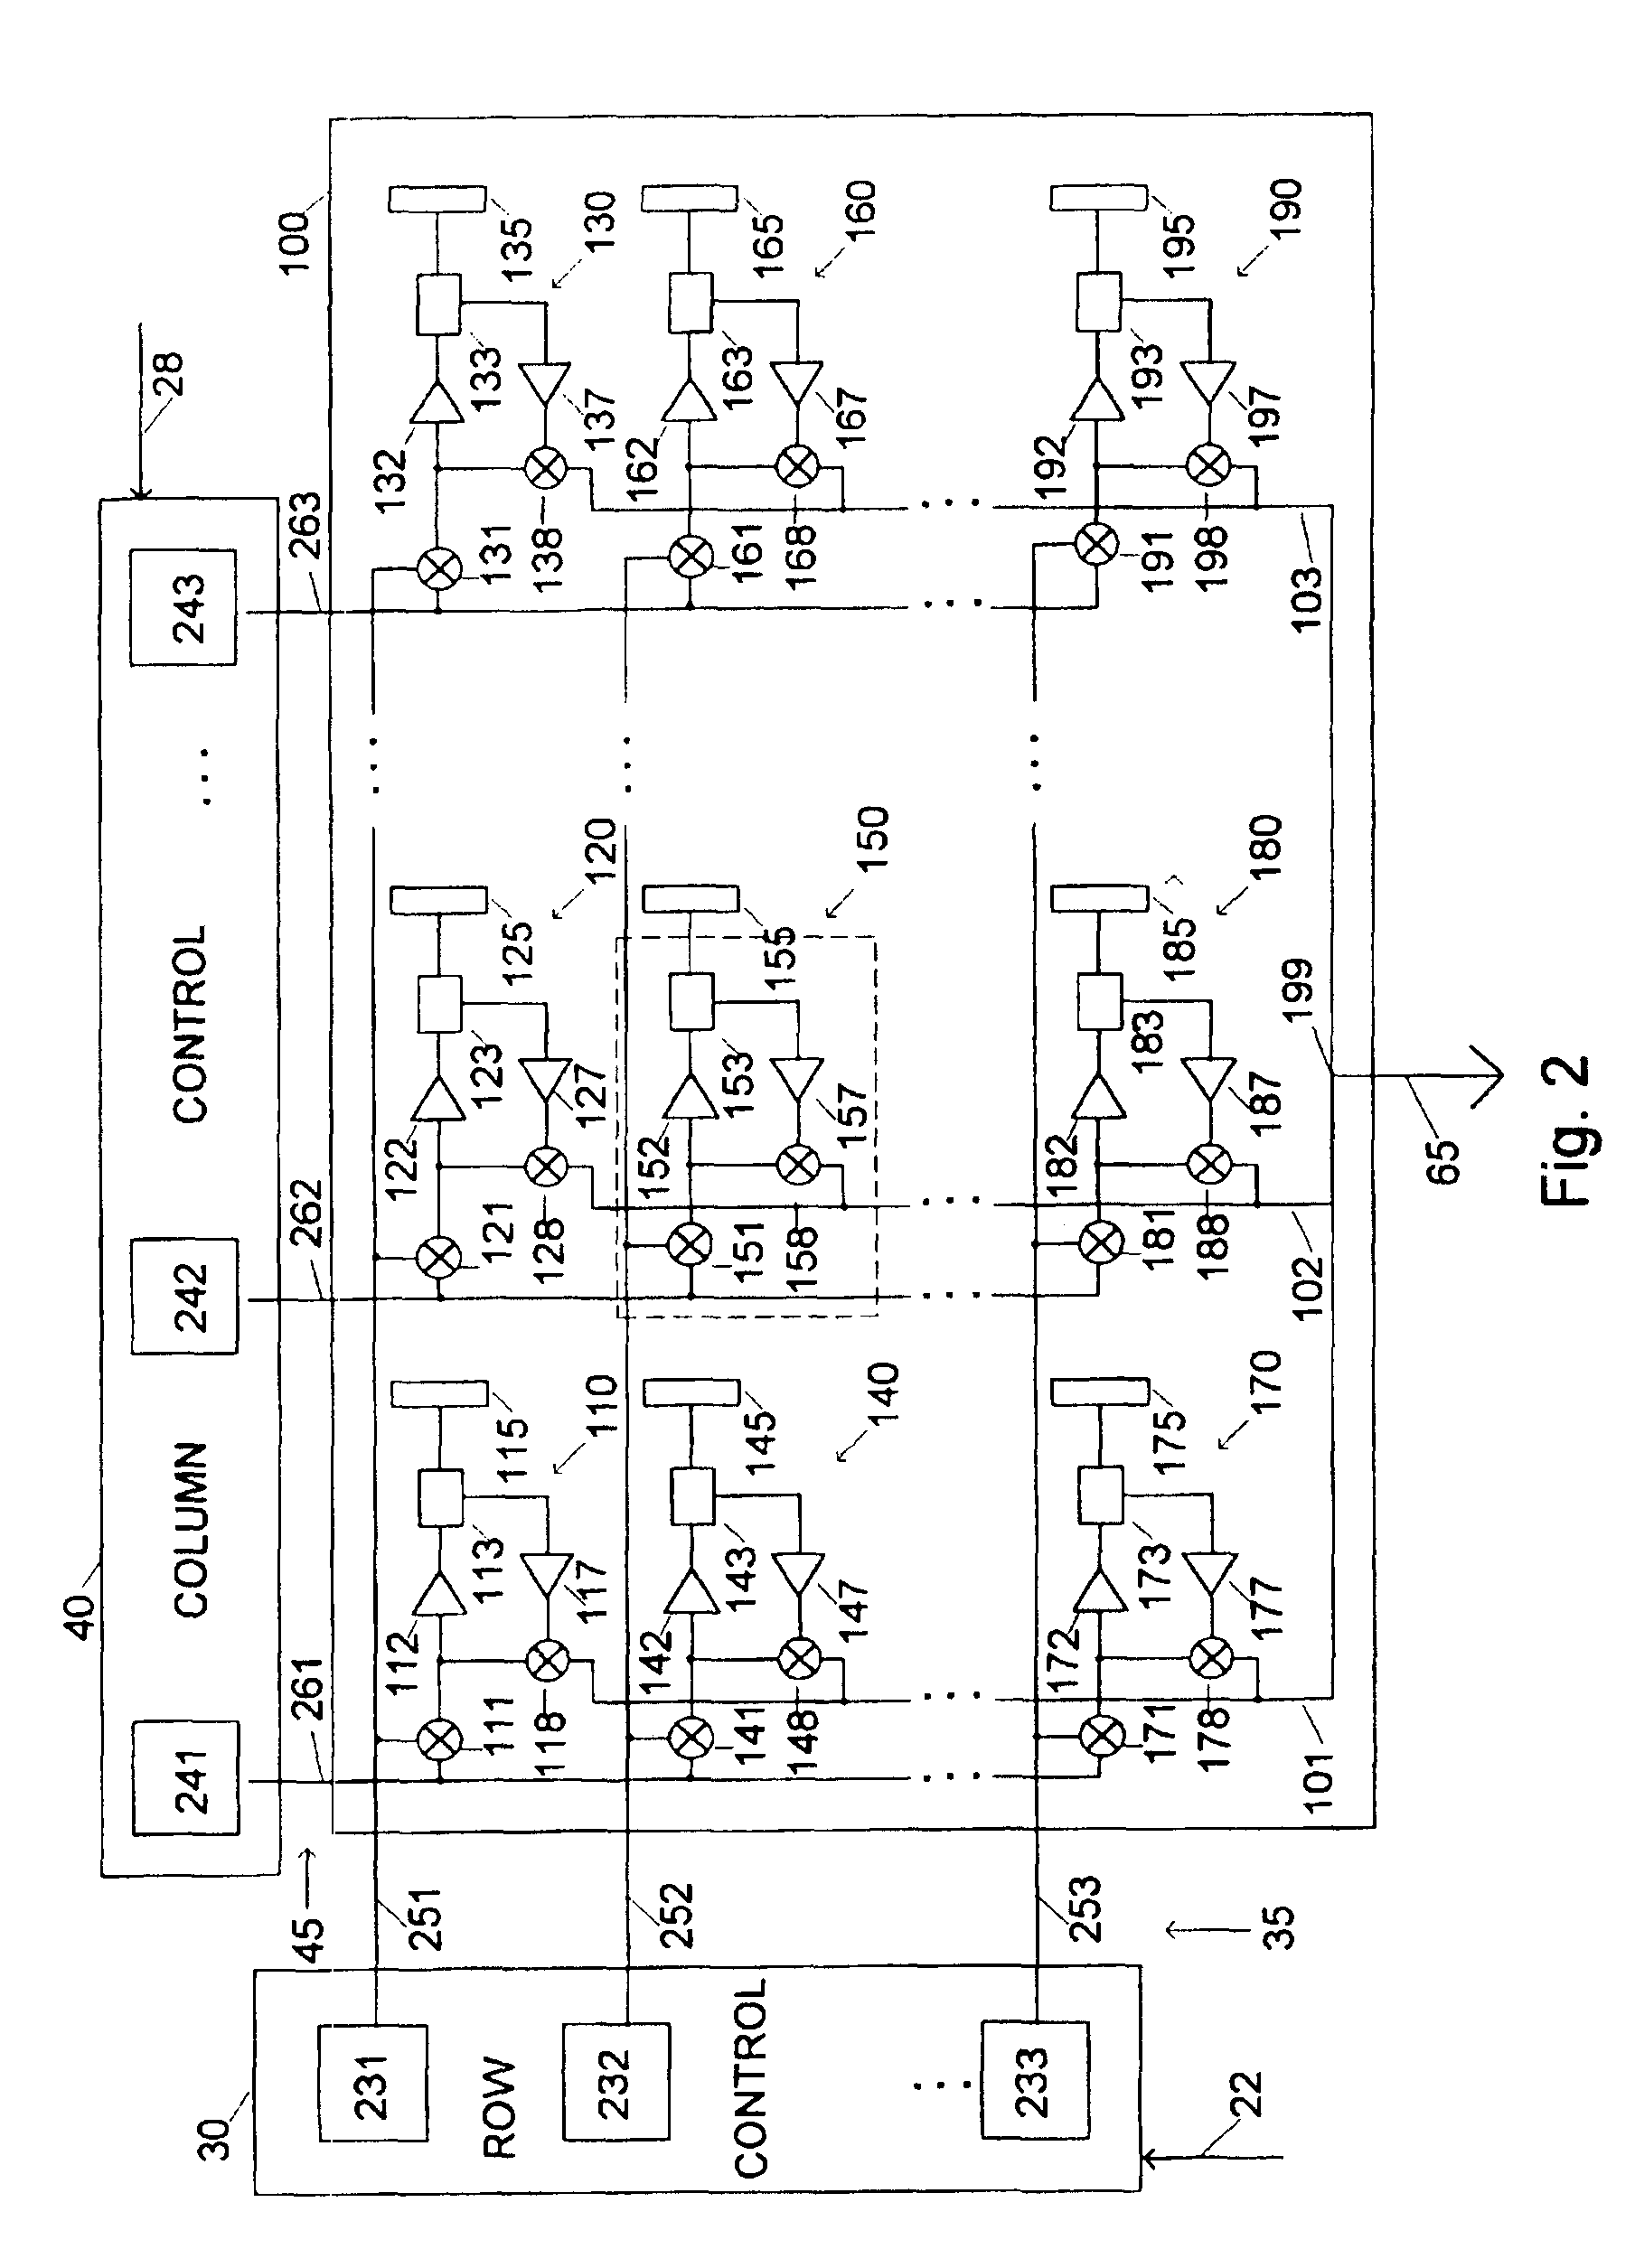 Acoustic wave imaging apparatus and method